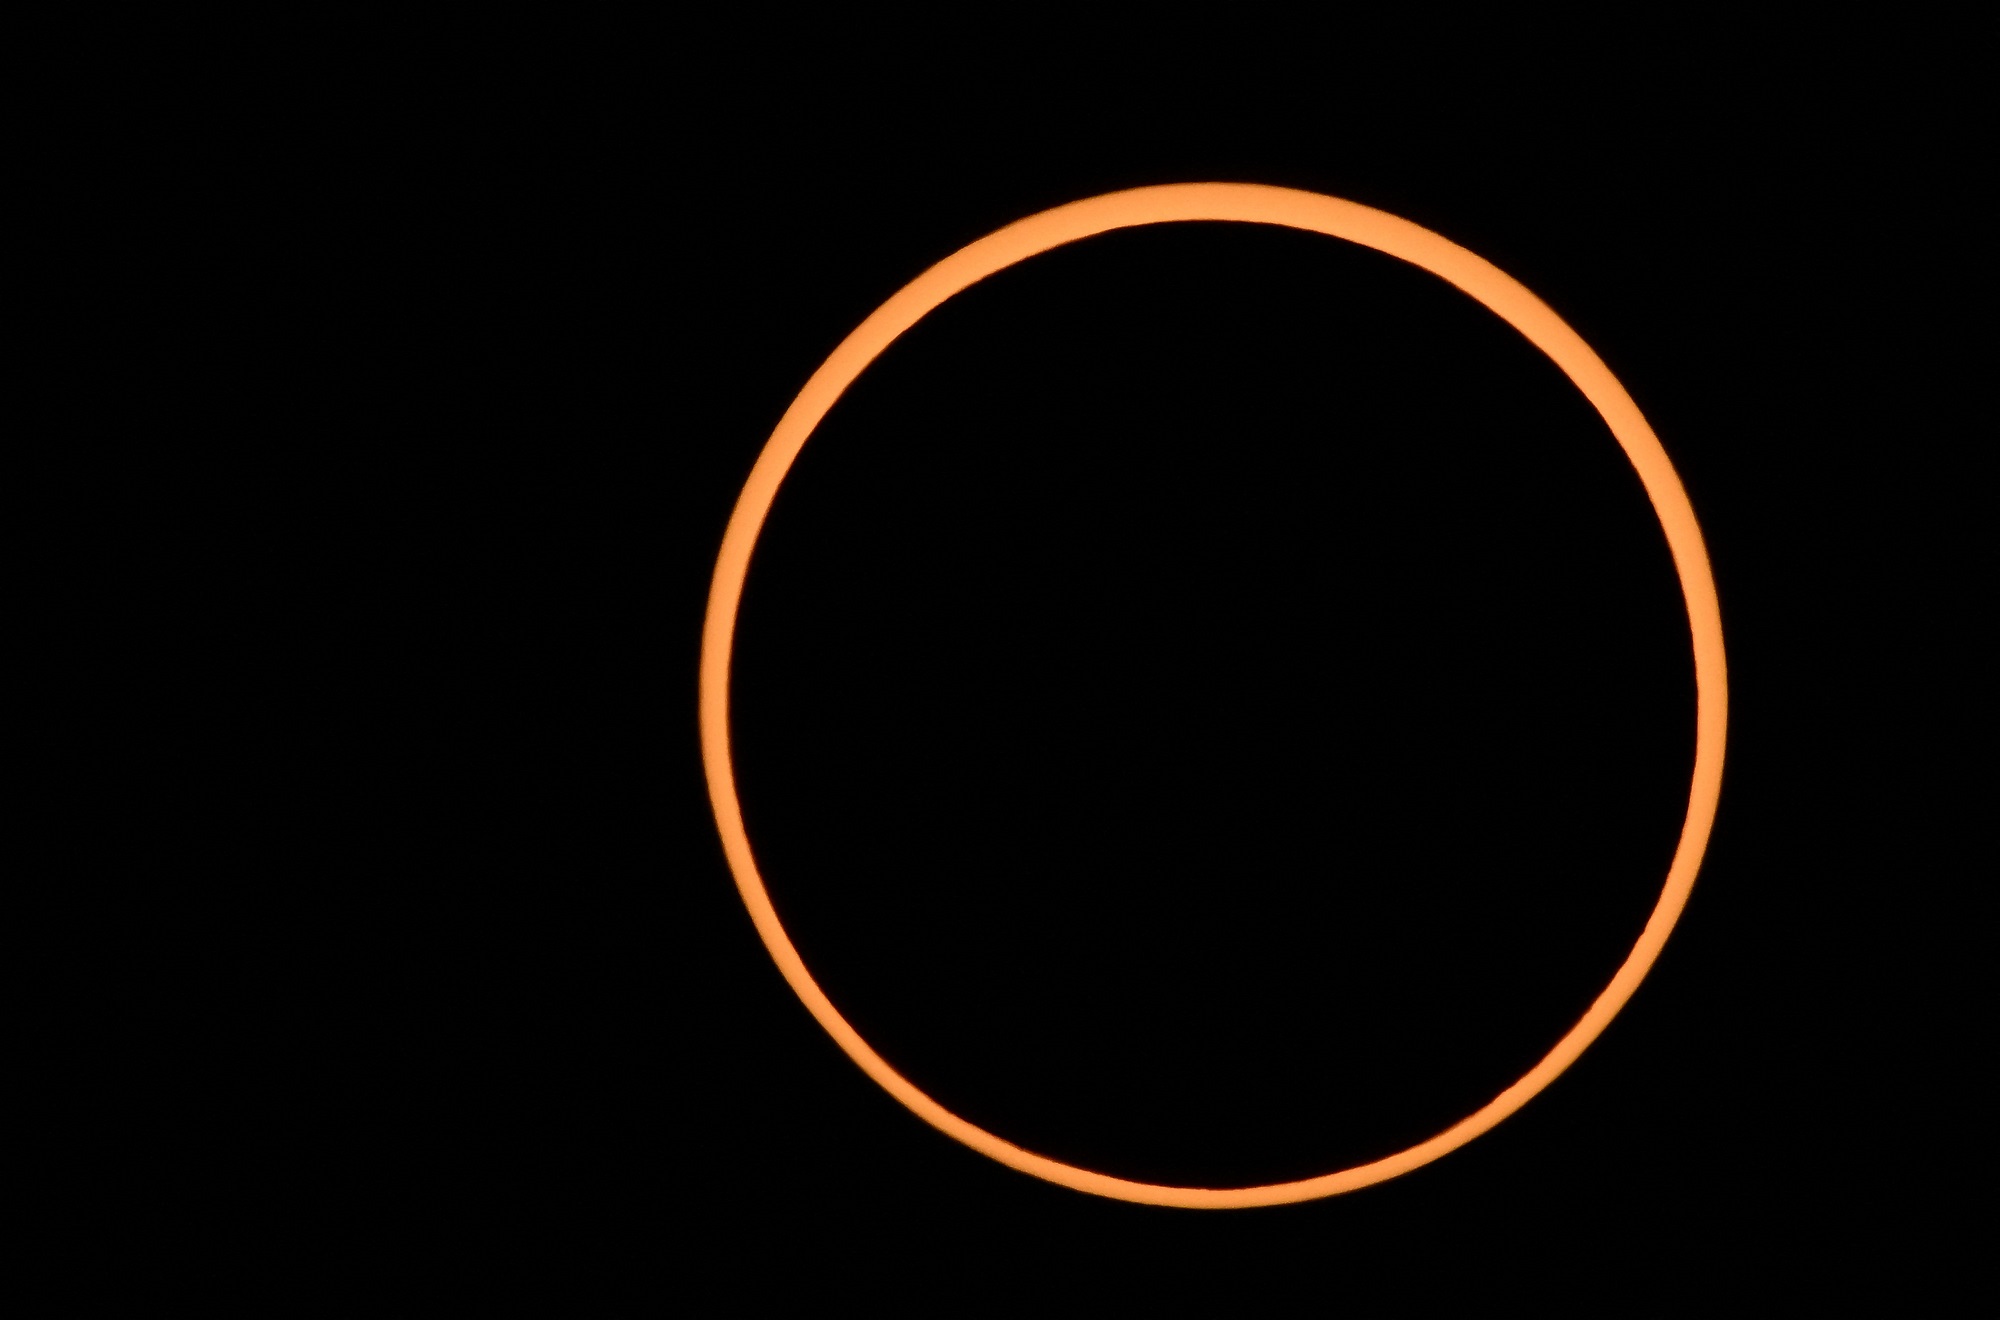 Annular solar eclipse of 2023 wows skywatchers with spectacular ‘ring of fire’ (photos, video)